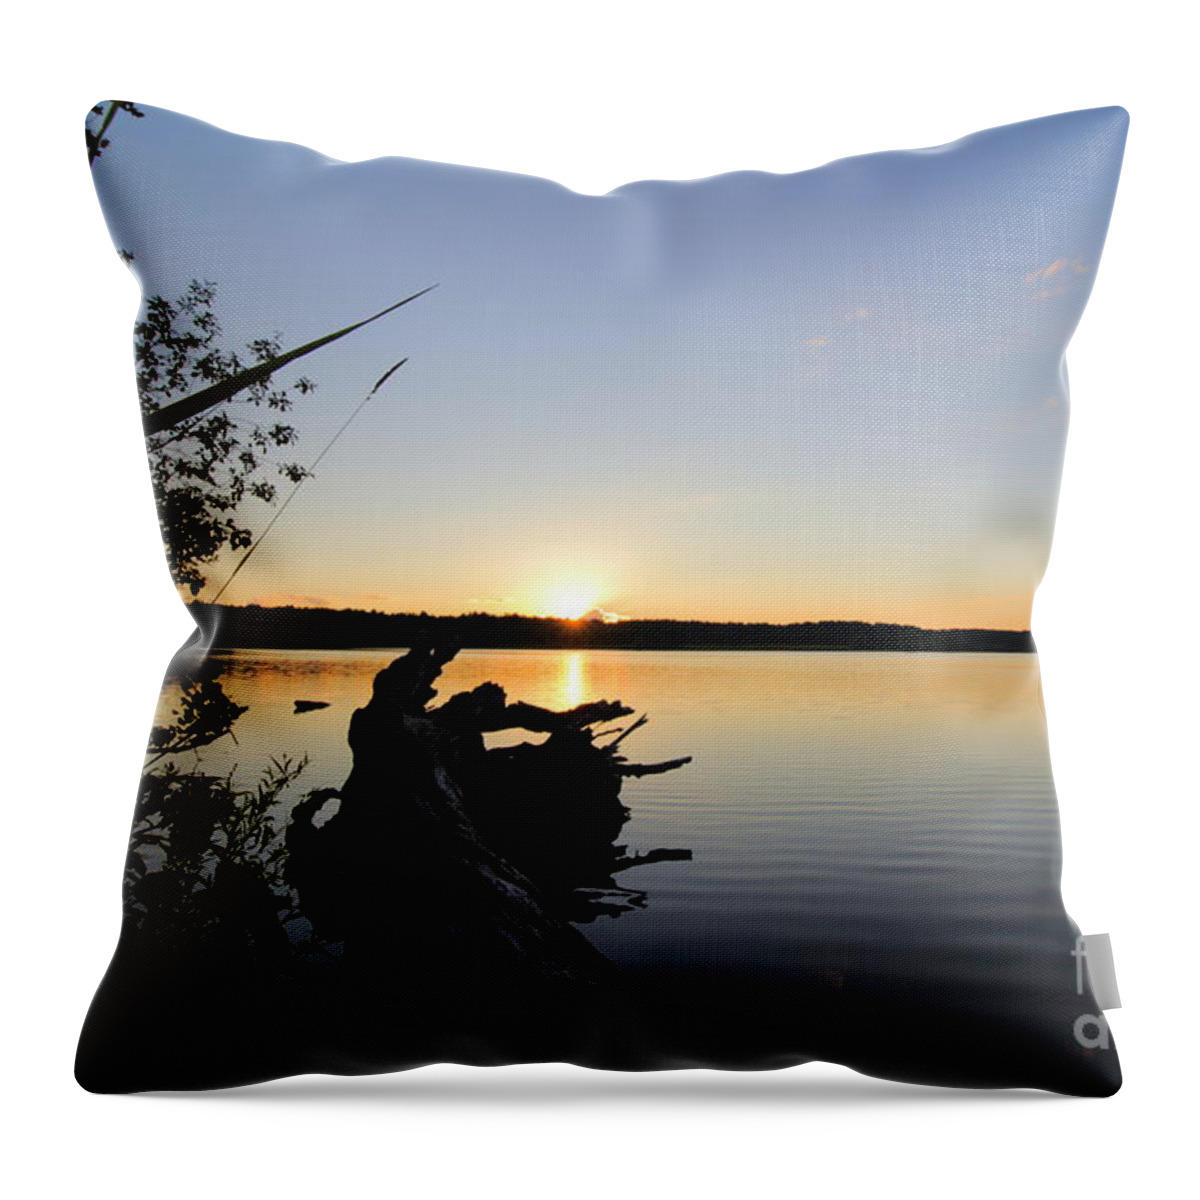 Sunset Throw Pillow featuring the photograph West Thompson Lake Summer Sunset by Neal Eslinger